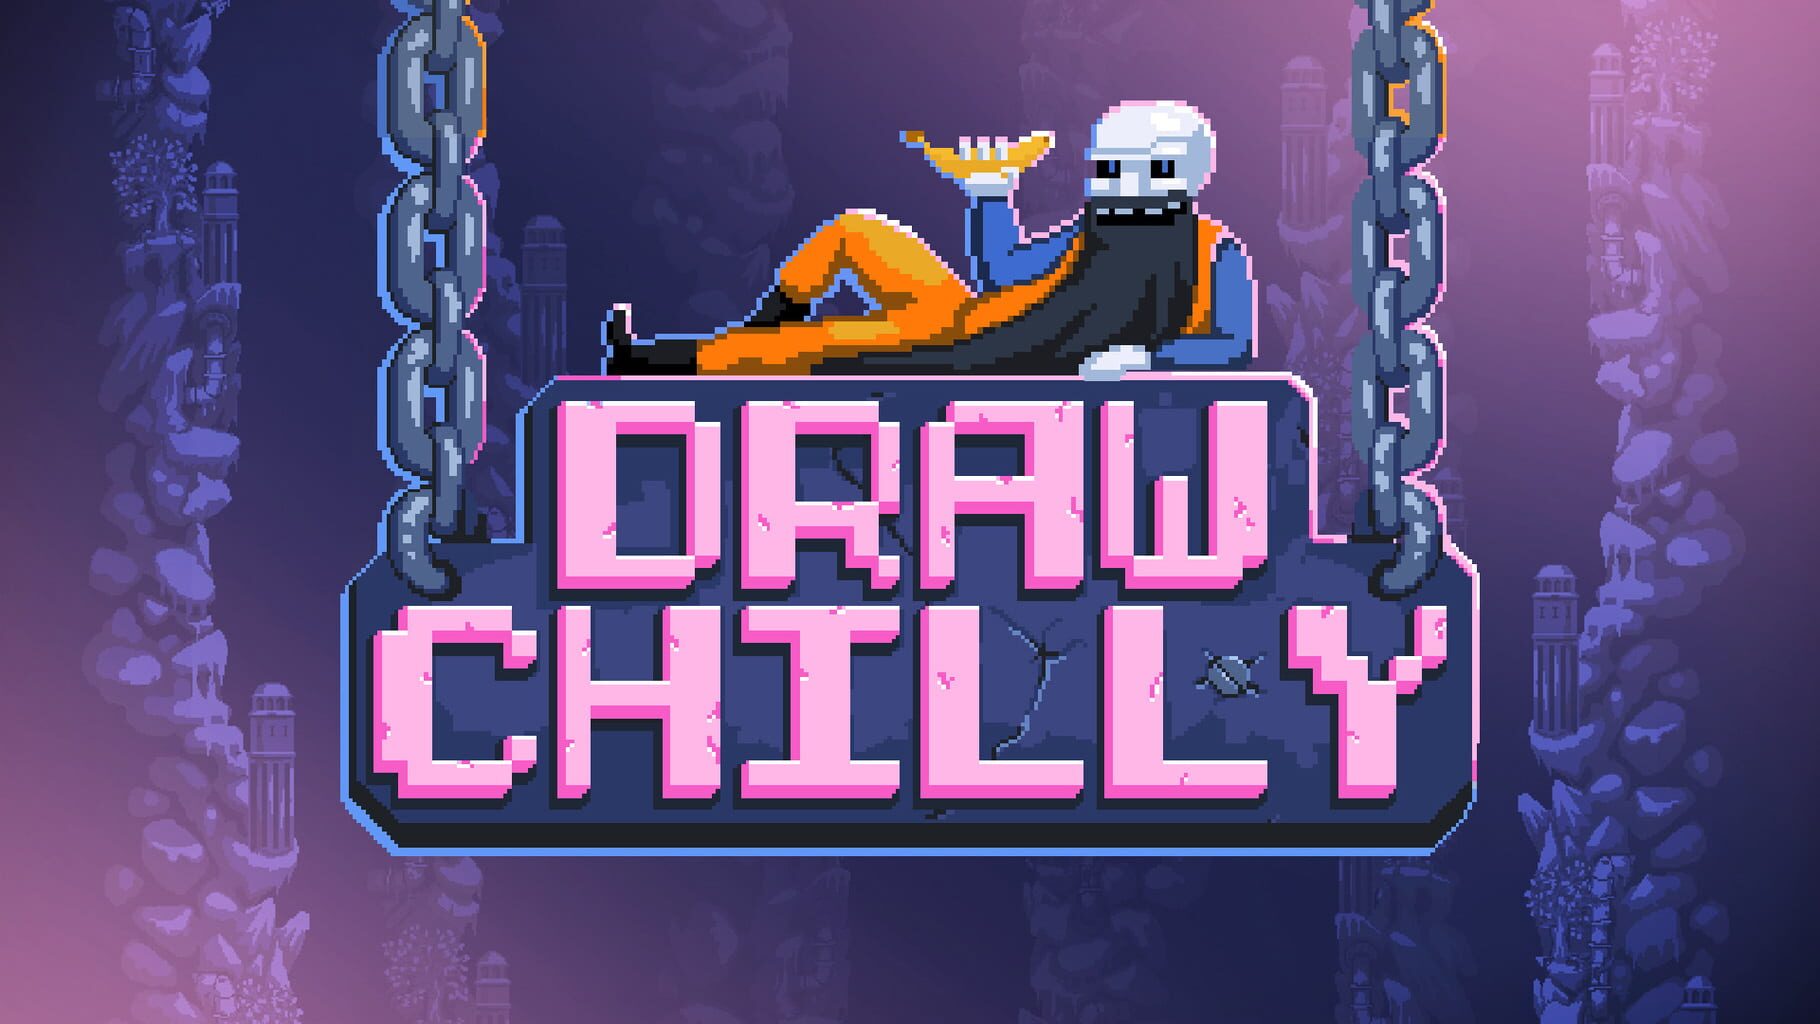 Draw Chilly artwork